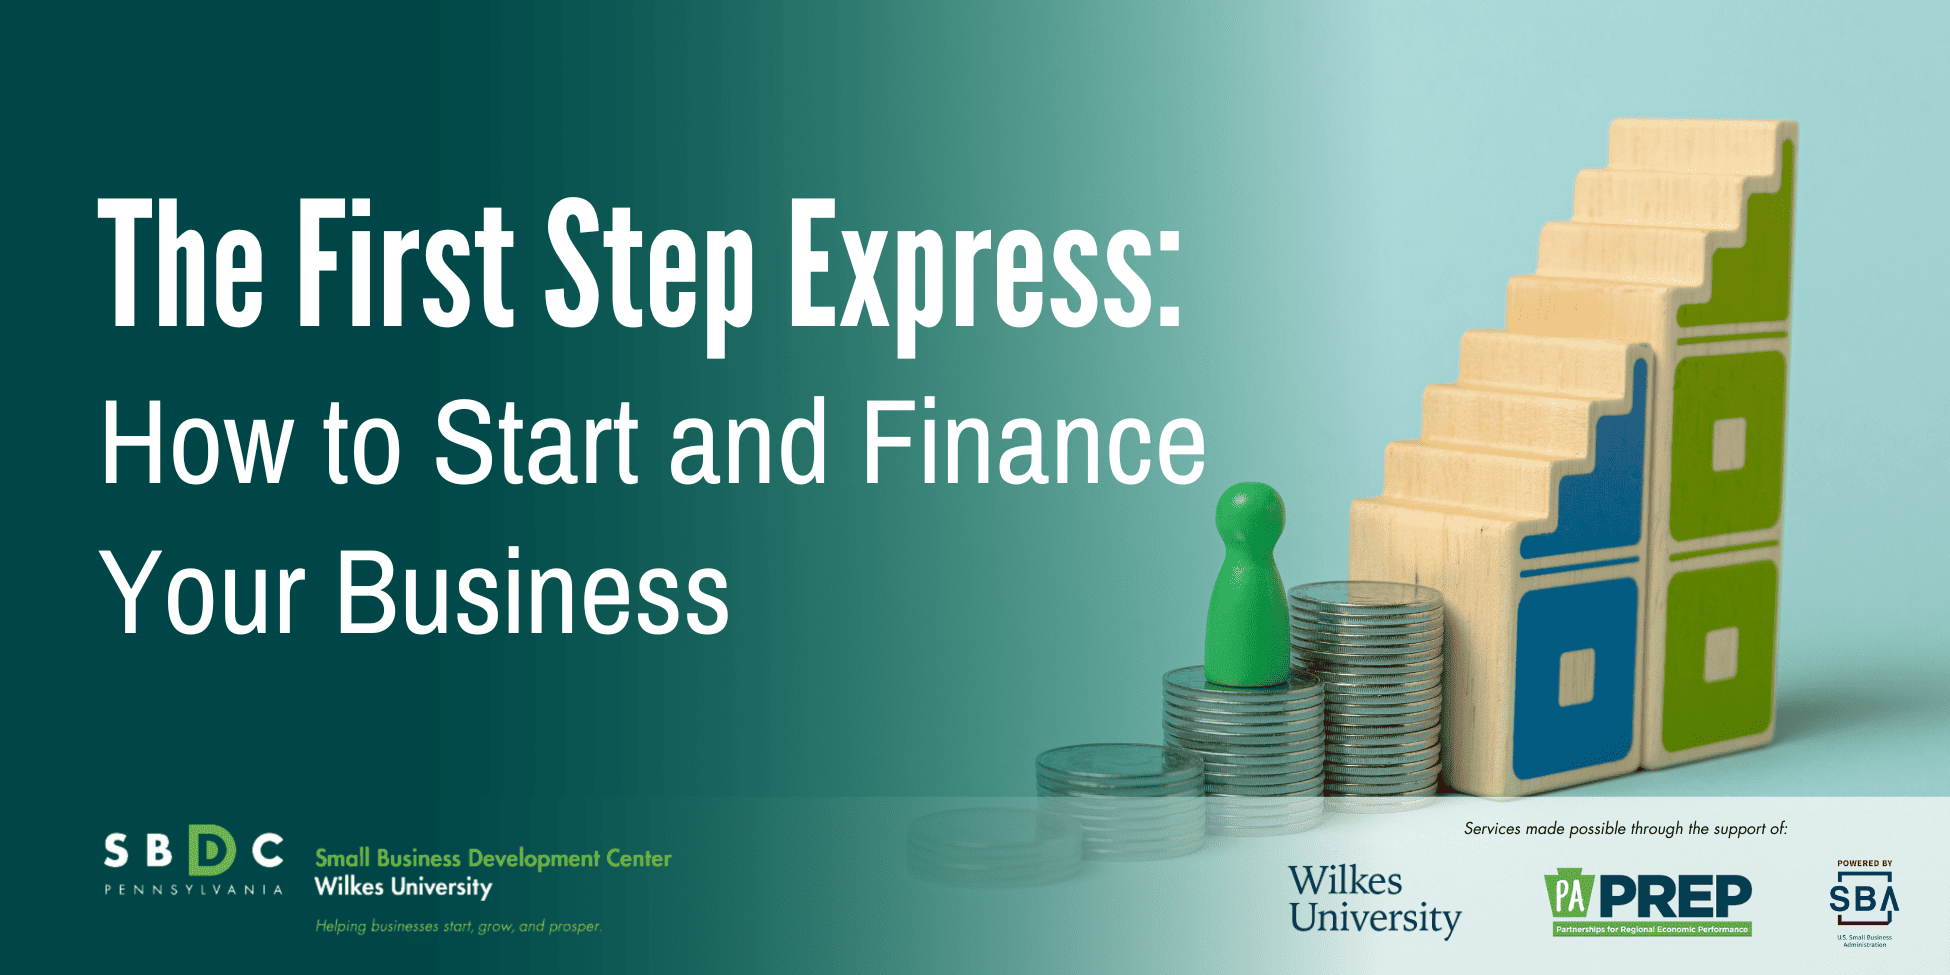 The First Step Express